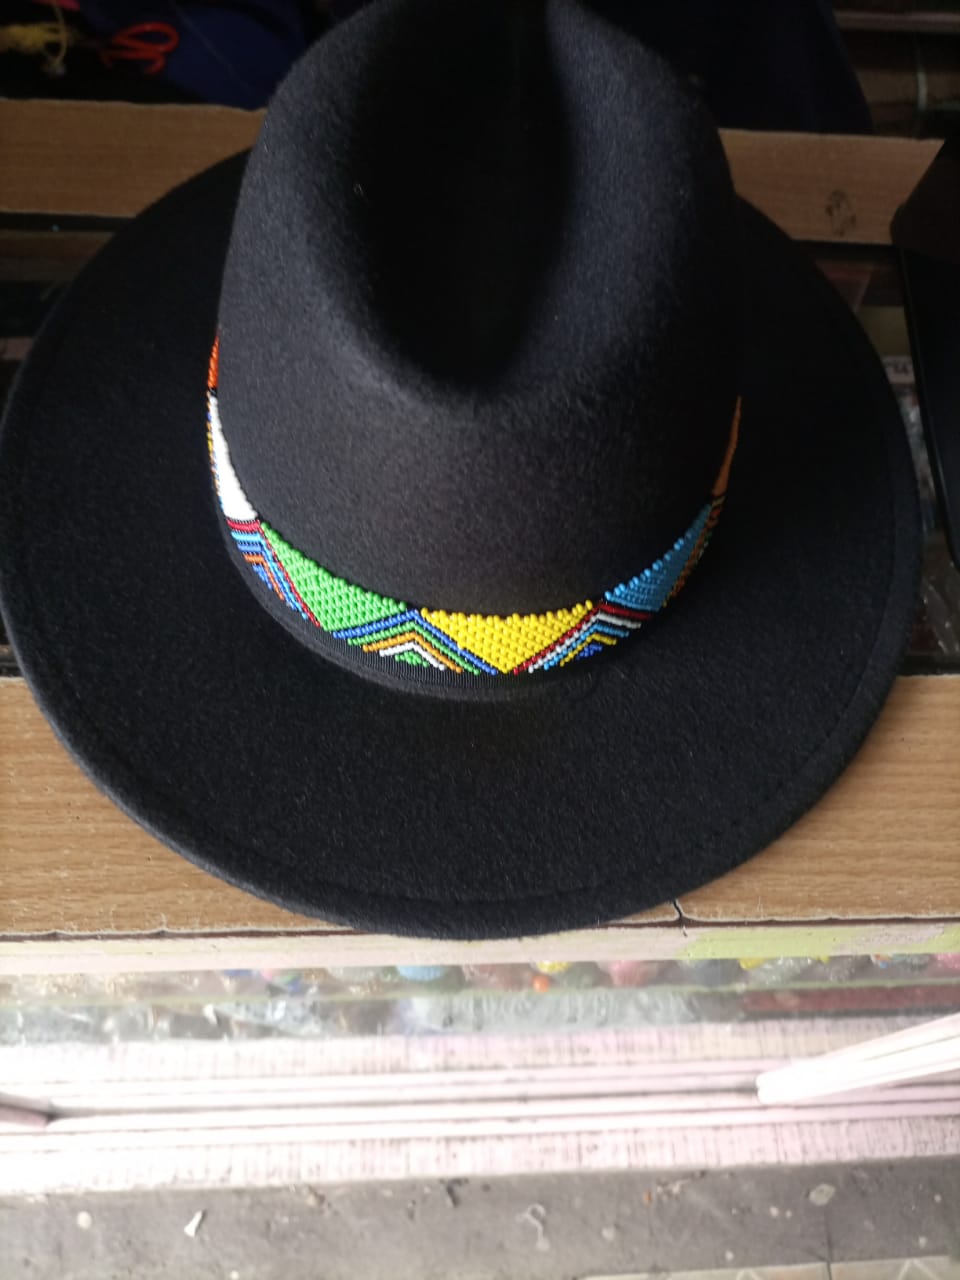 Fedora hat decorated with colorful beads